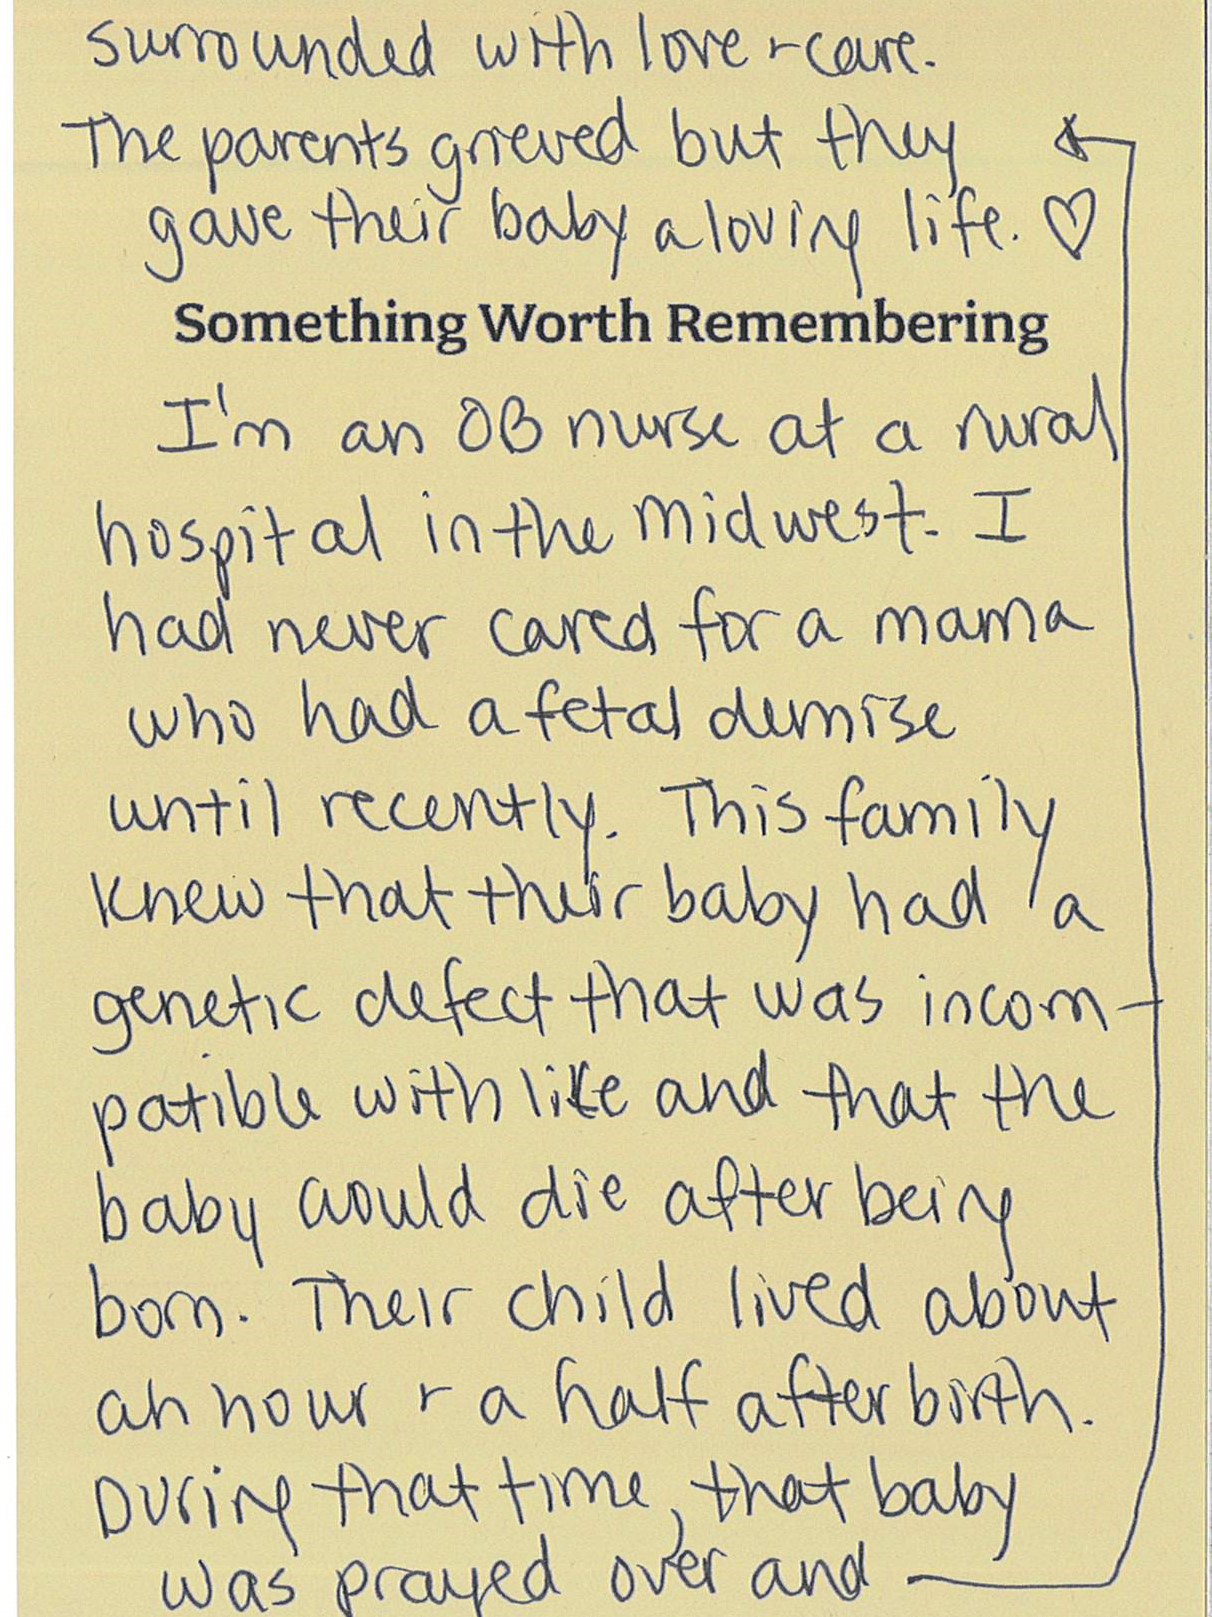 A hand written note reads: "I'm an OB nurse at a rural hospital in the Midwest. I had never cared for a mama who had a fetal demise until recently. This family knew that their baby had a genetic defect that was incompatible with life and that the baby would die after being born. Their child lived about an hour + a half after birth. During that time that baby was prayed over and surrounded with love + care. The parents grieved but they gave their baby a loving life." The note is punctuated with a heart at the end.